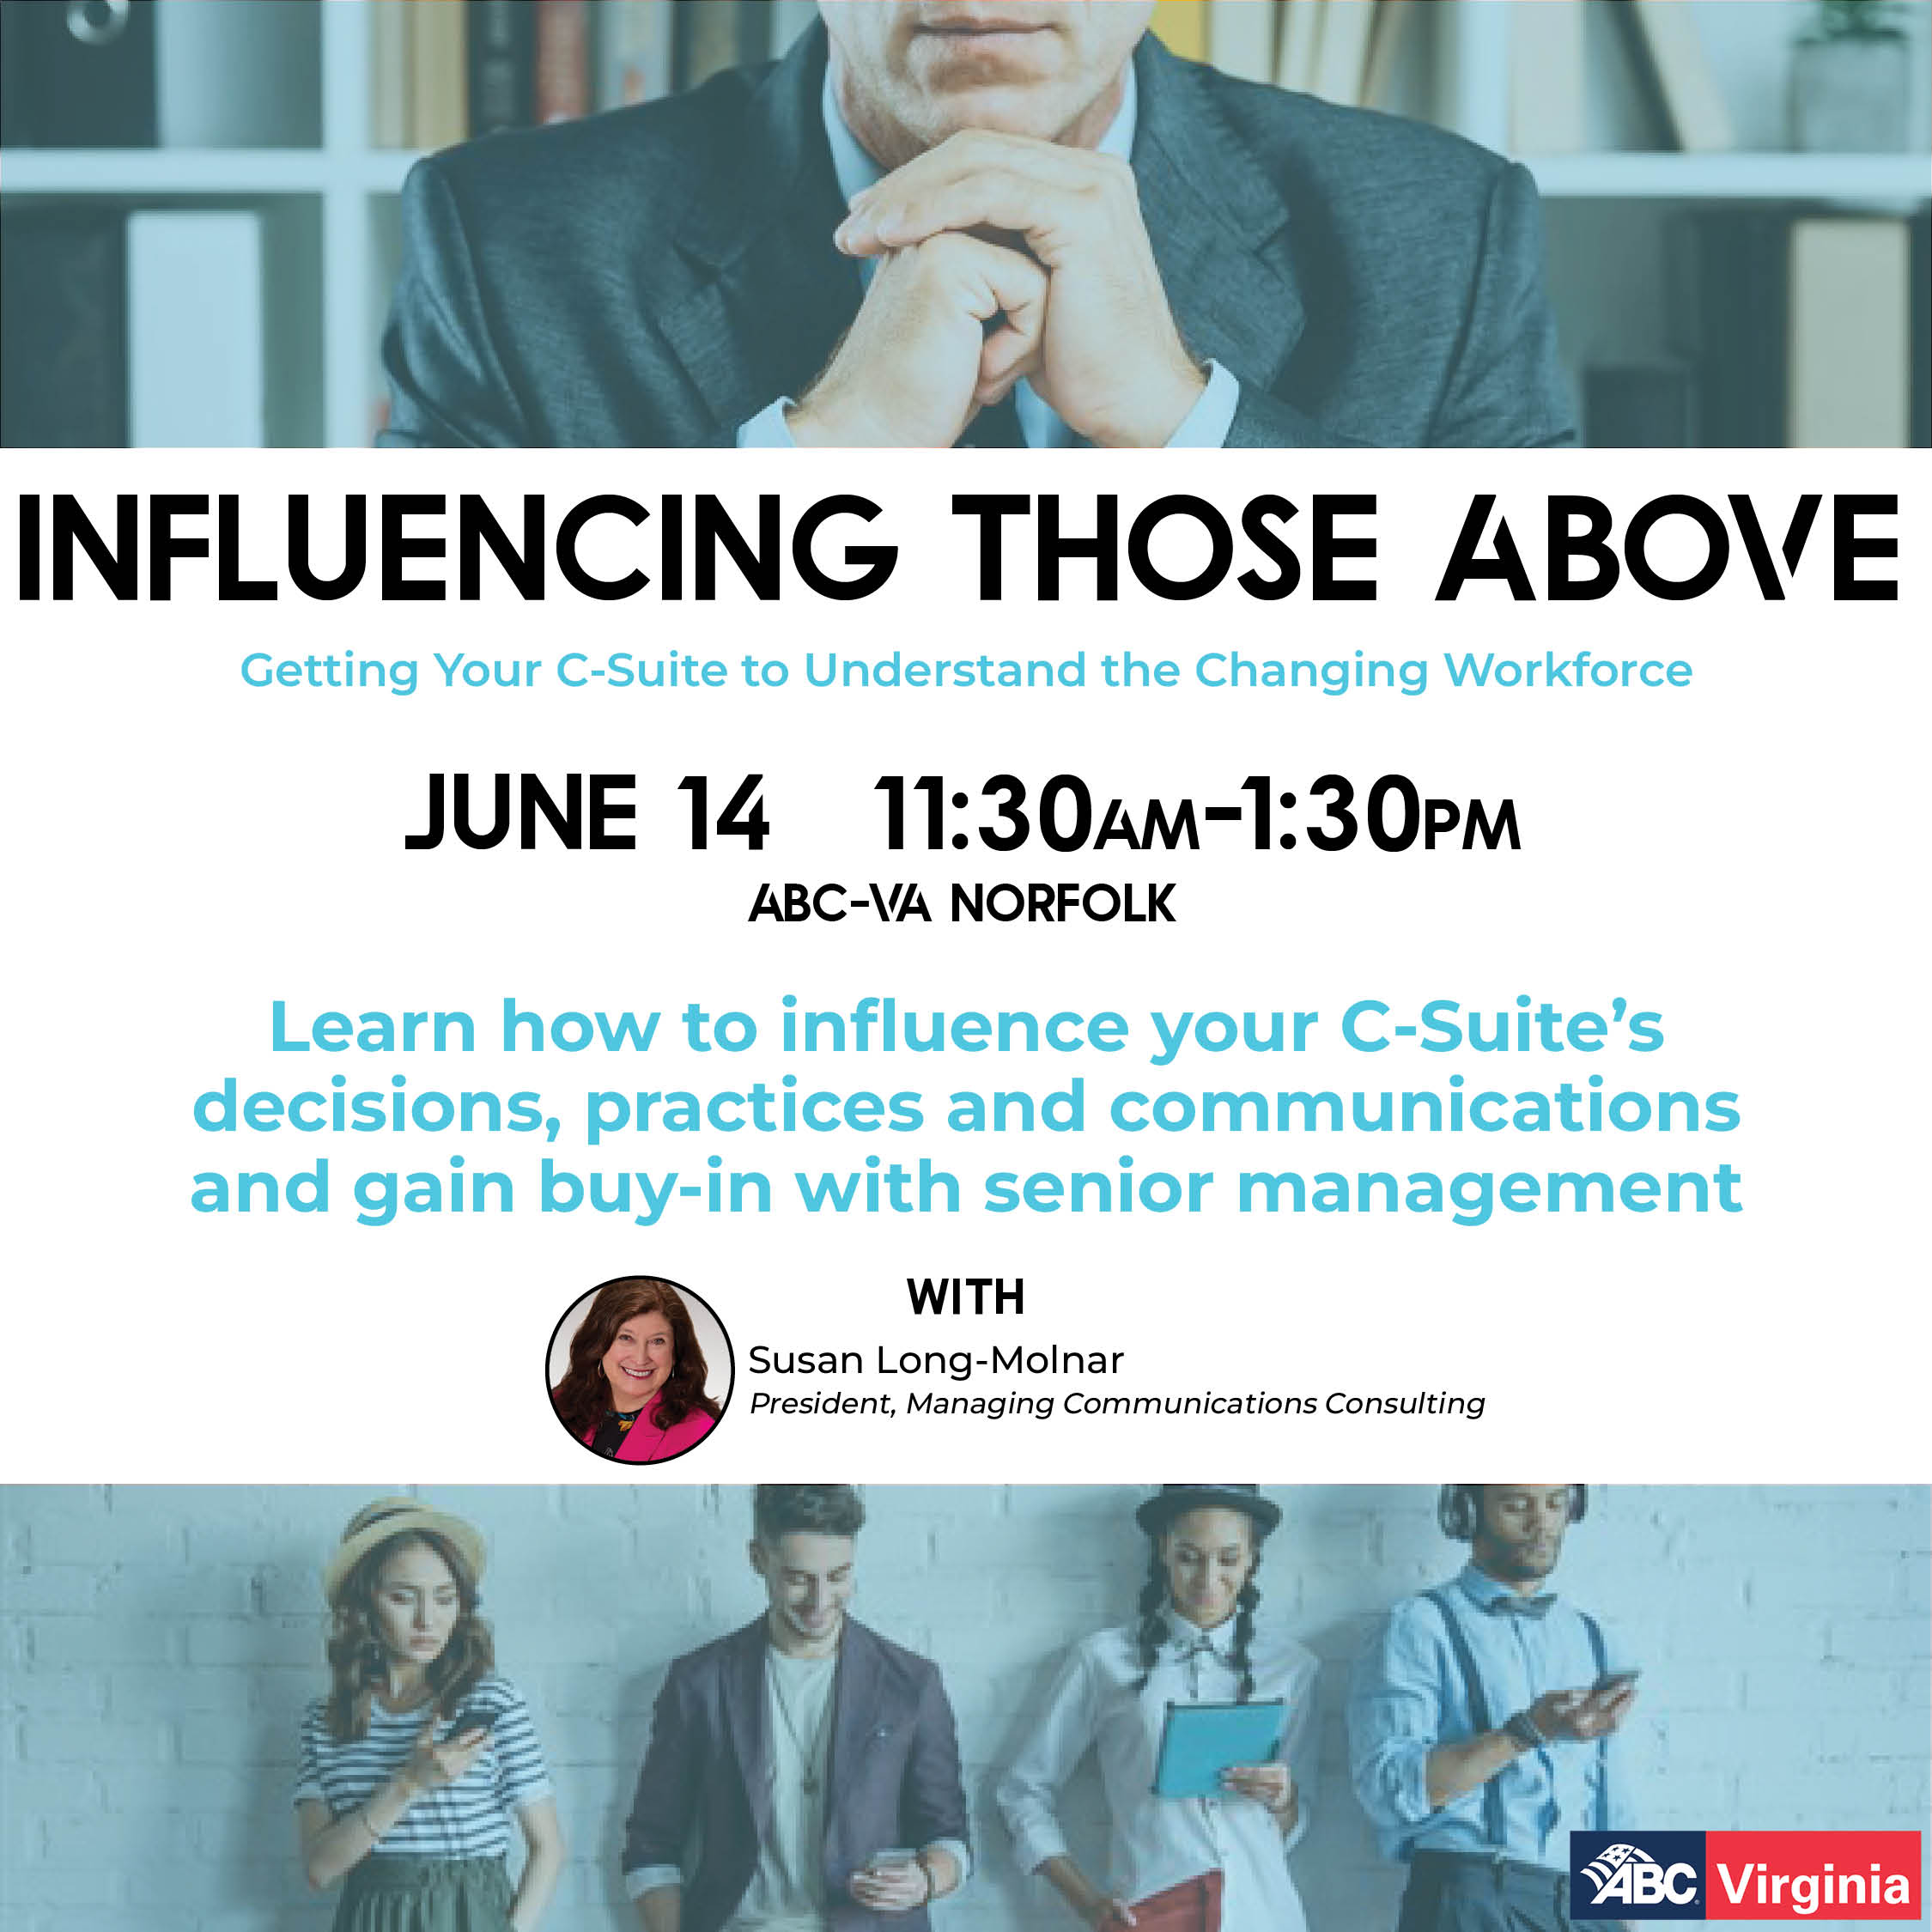 HR Influencing Those Above June 14 WEB